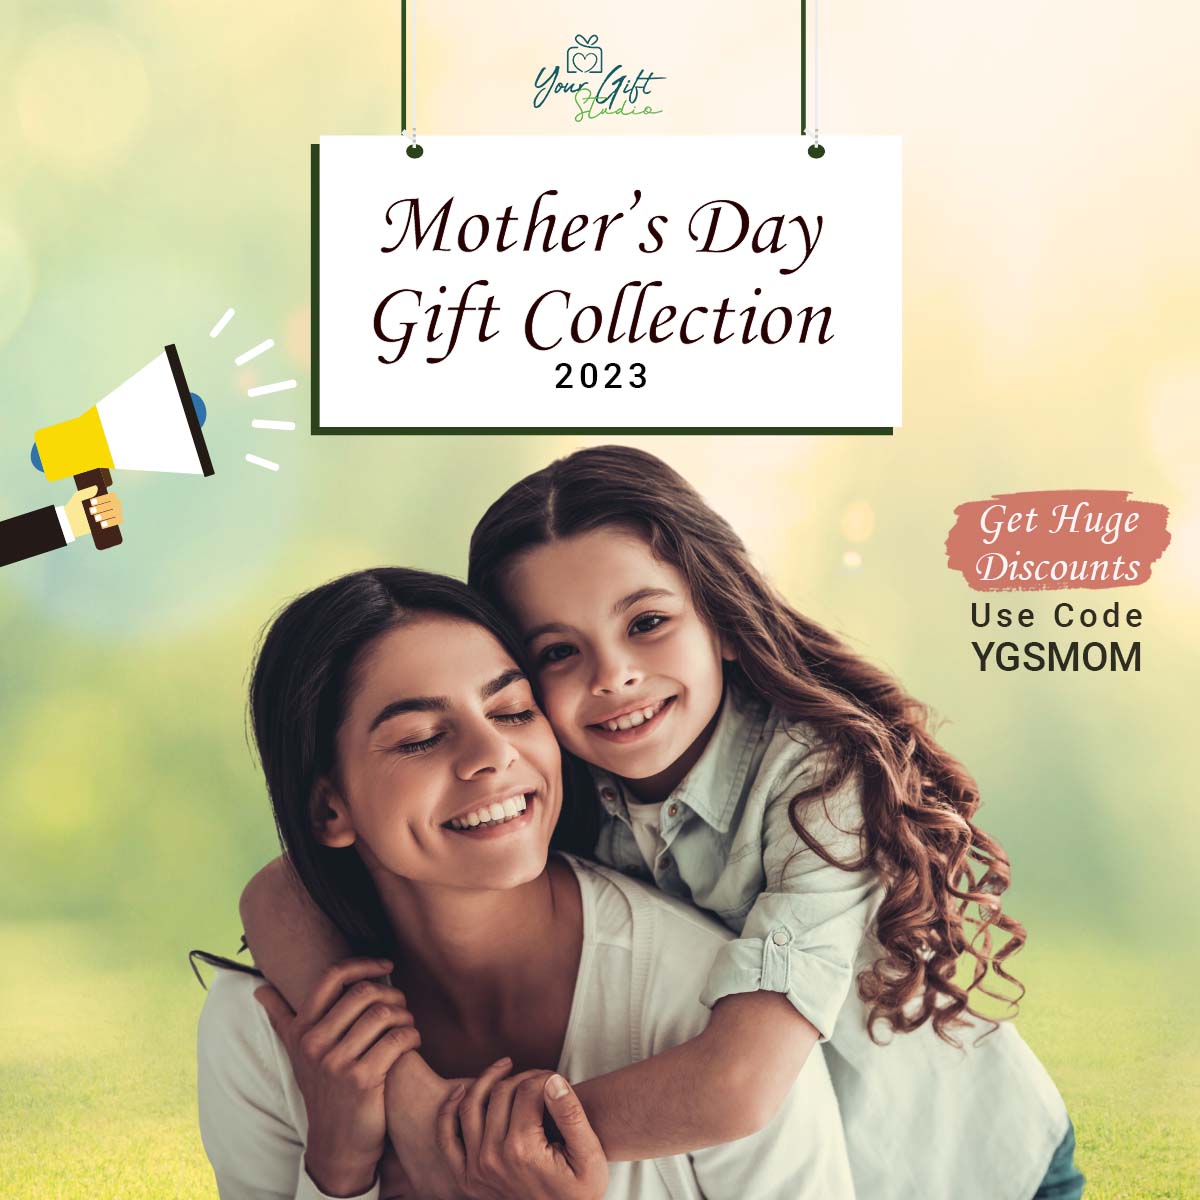 Best 15 Customized Gift Ideas for Mother's day 2023